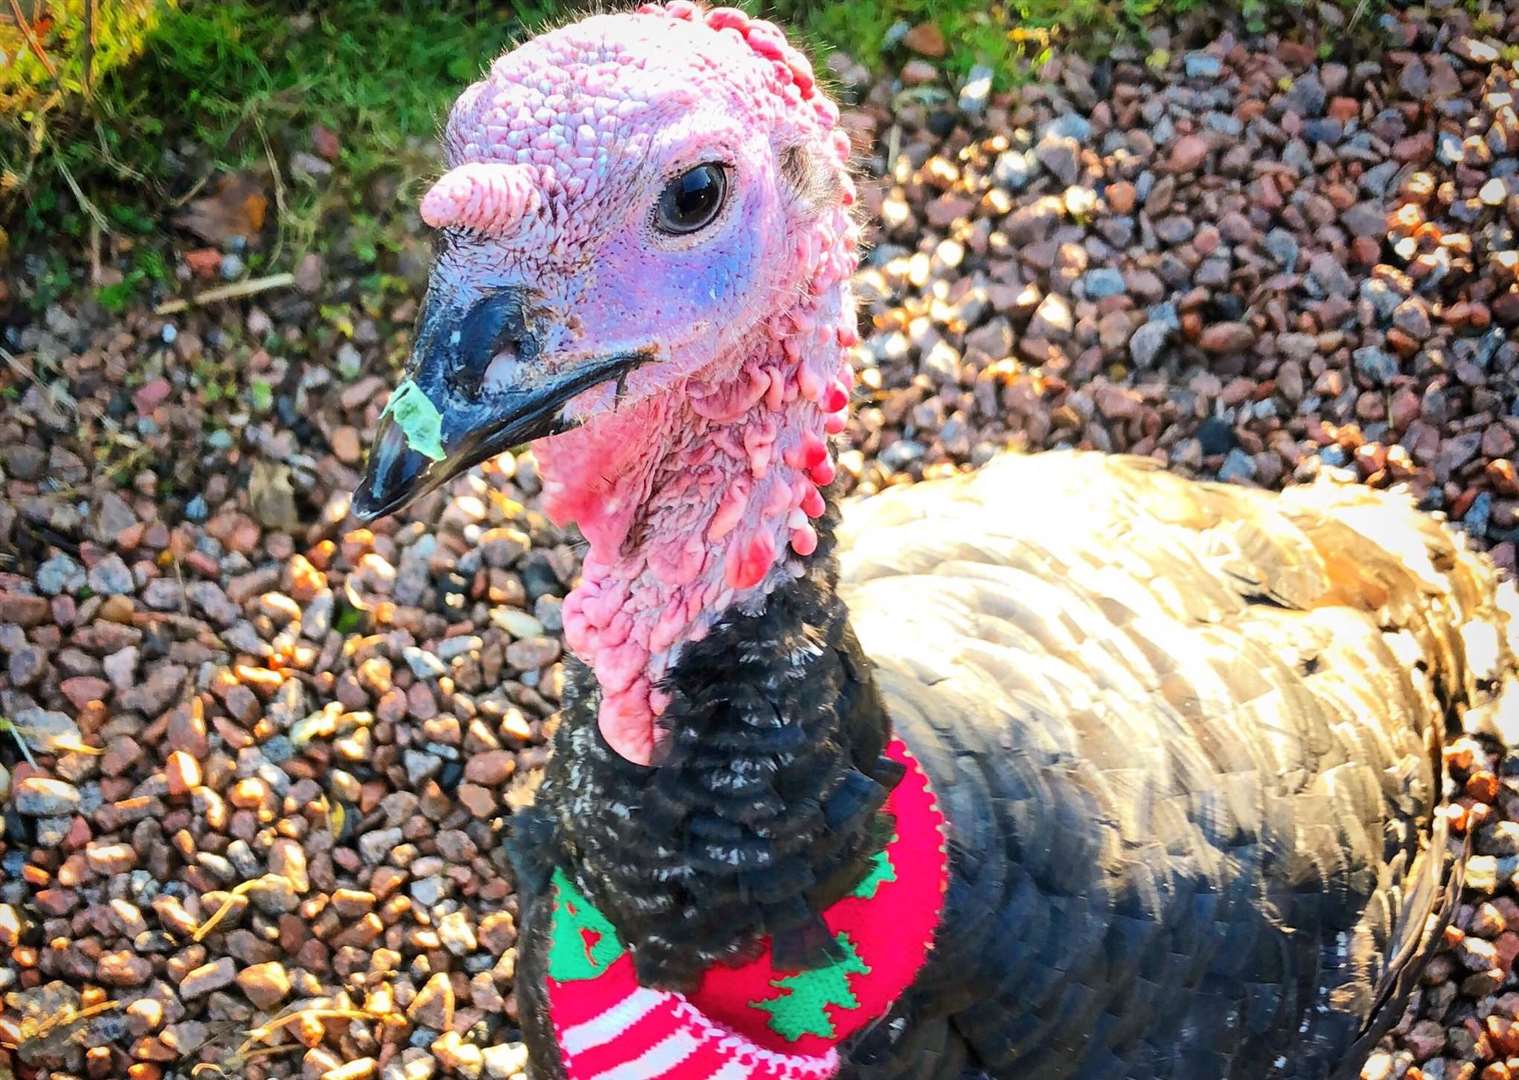 One of the turkeys saved from the Christmas chop